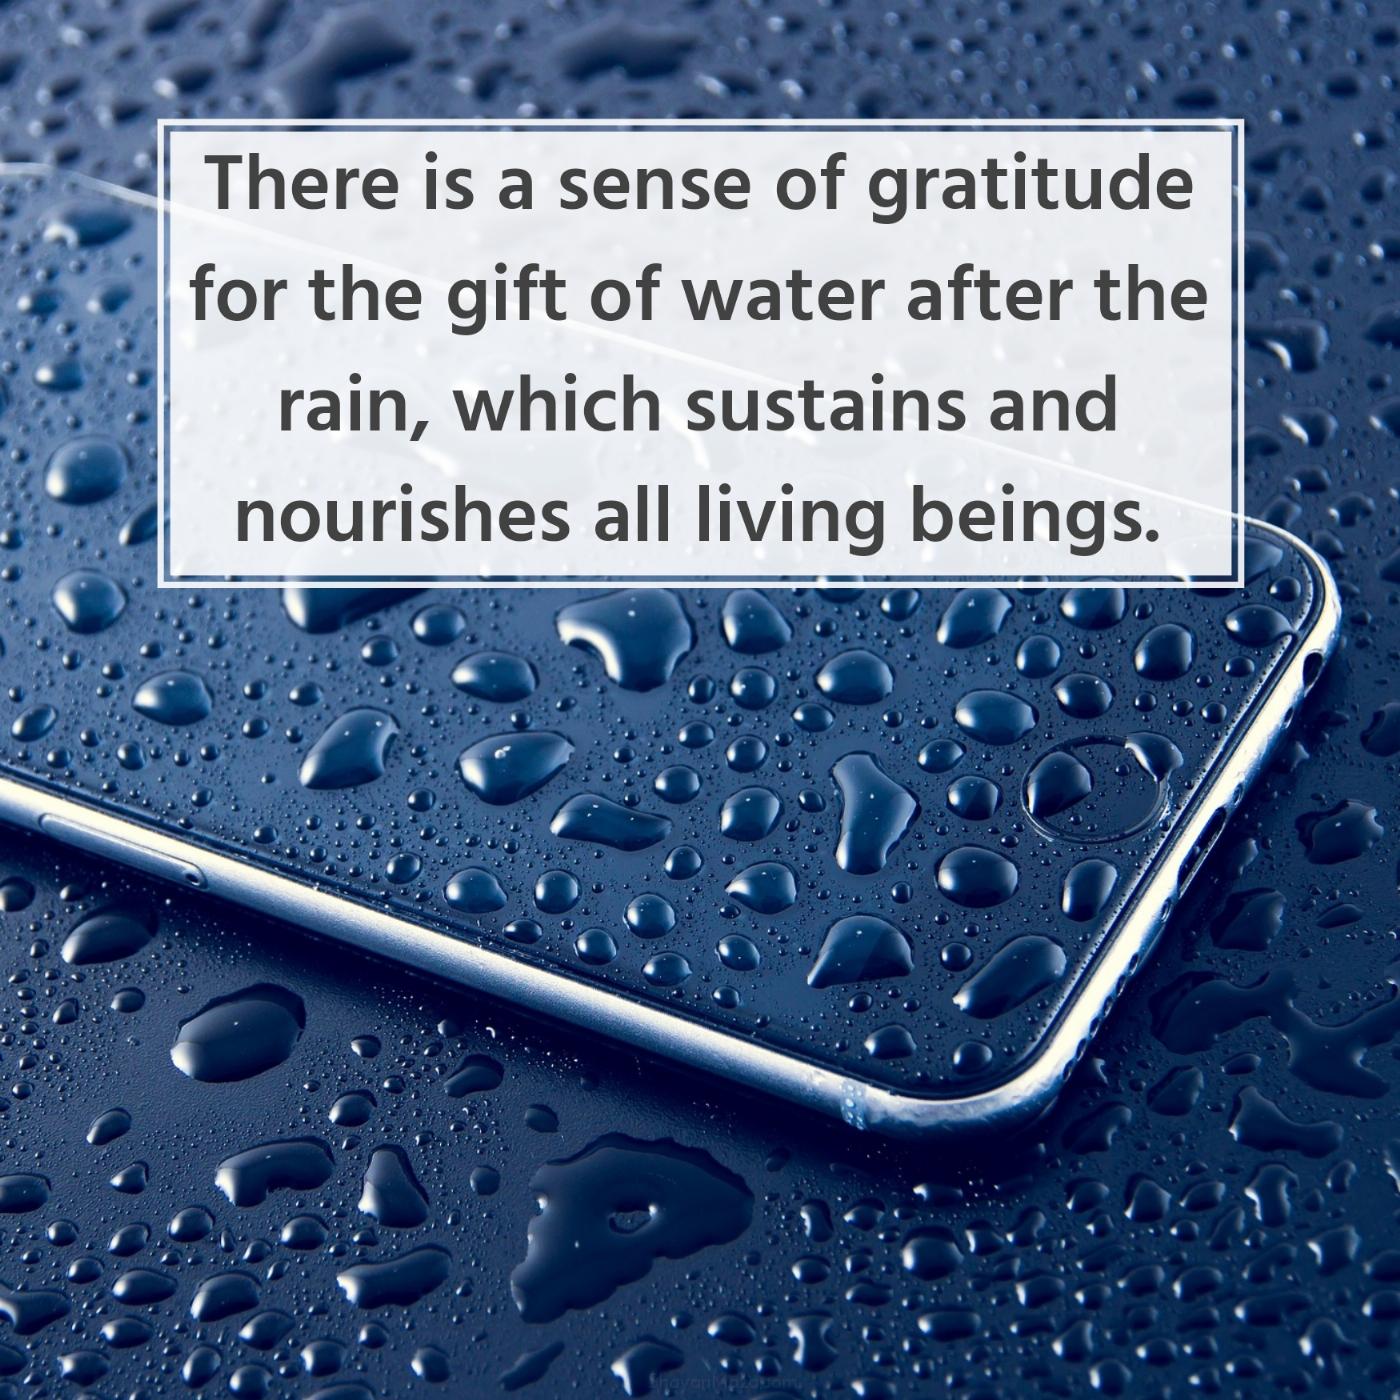 There is a sense of gratitude for the gift of water after the rain